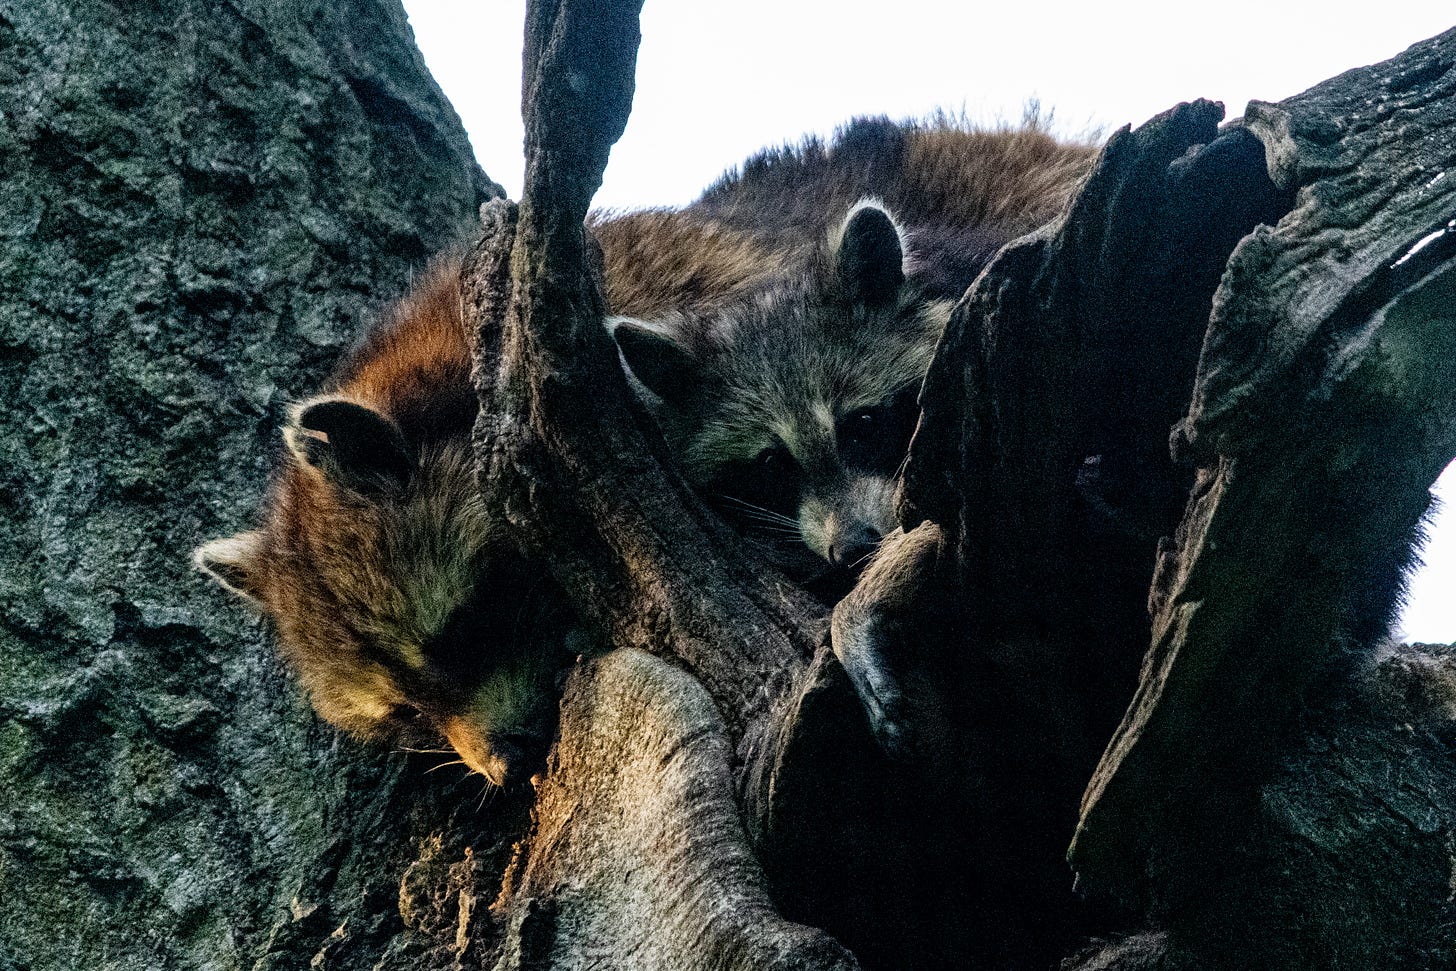 A parent and child raccoon, lolling in the fork of a tree